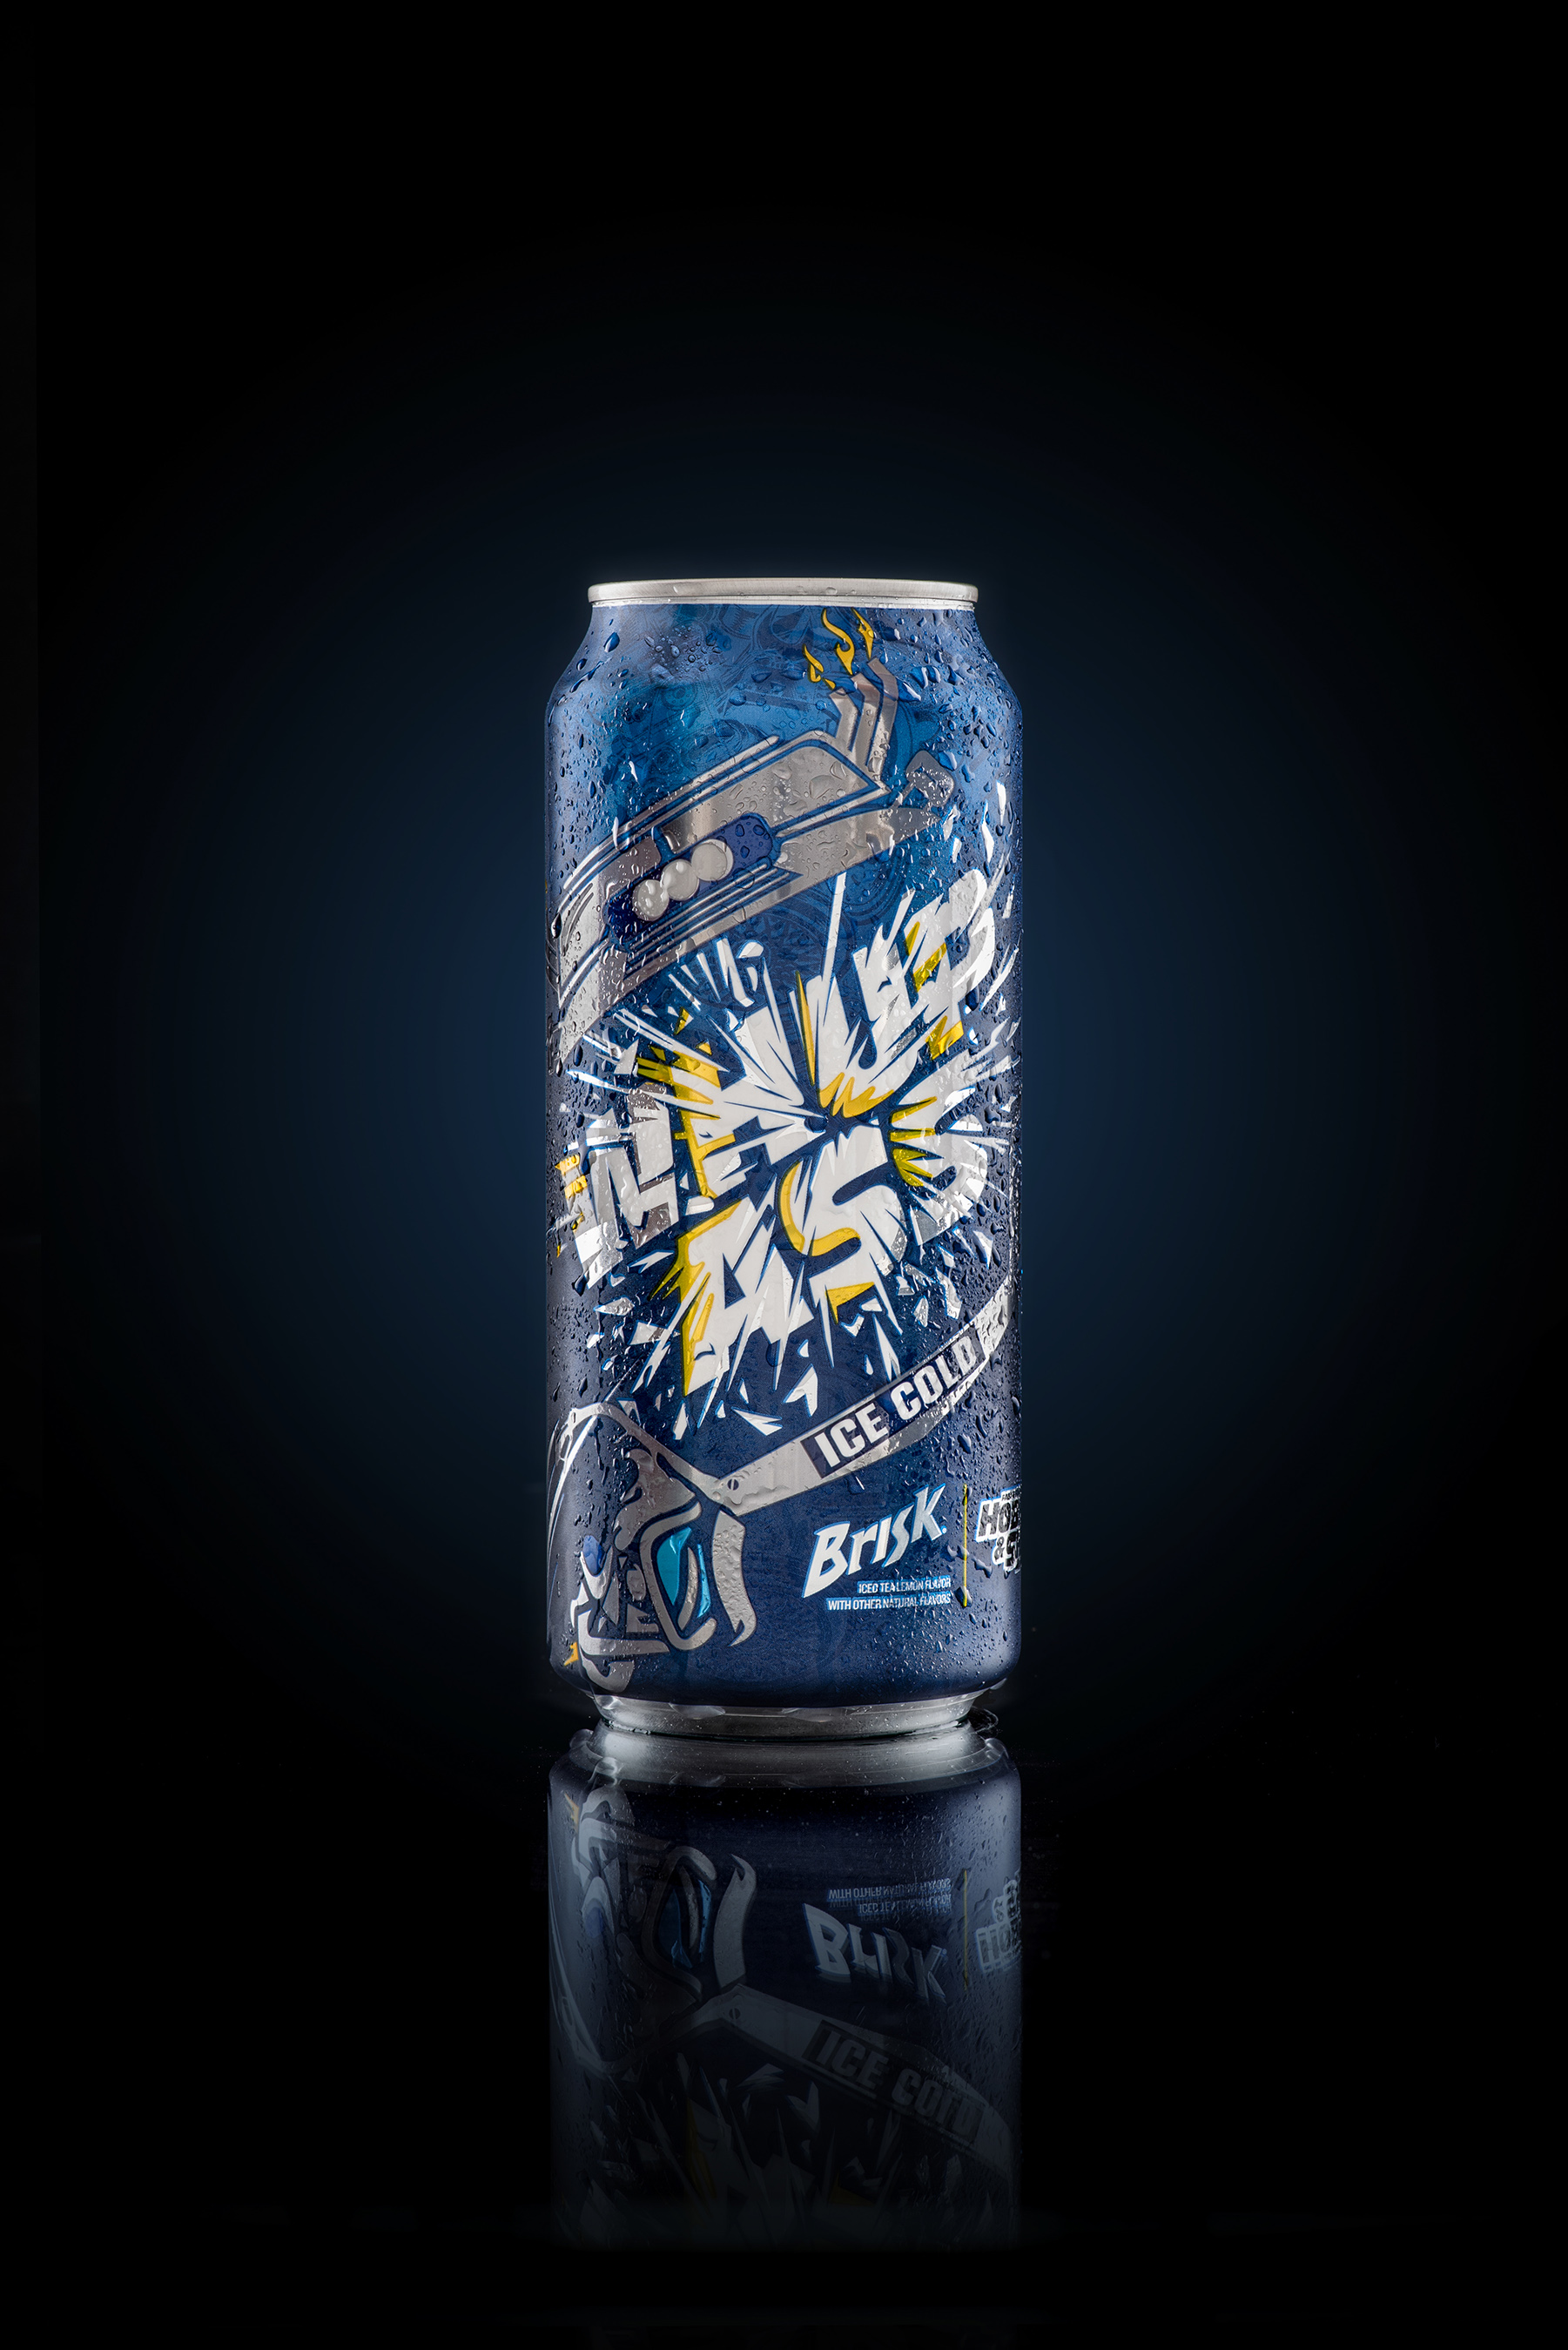 Brisk Iced Tea Partners with Universal Pictures’ “Fast & Furious Presents: Hobbs & Shaw,” introduces "Cans of Whup Ass"